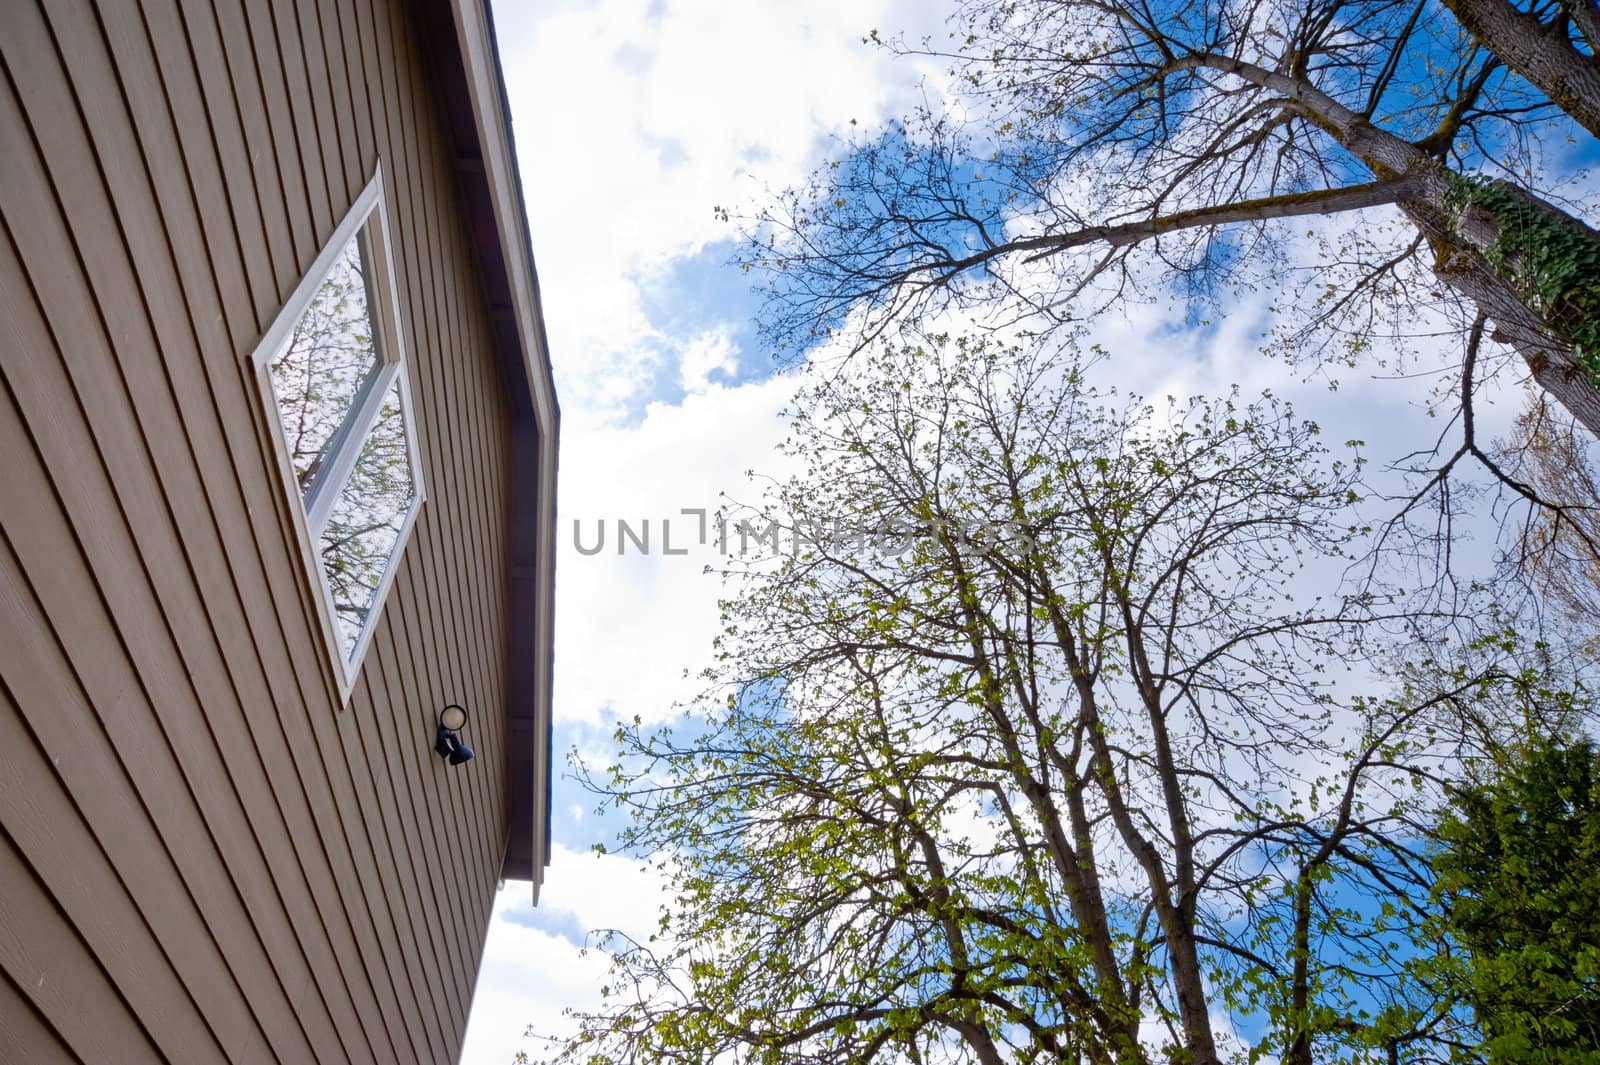 Looking up at a house, sky and trees